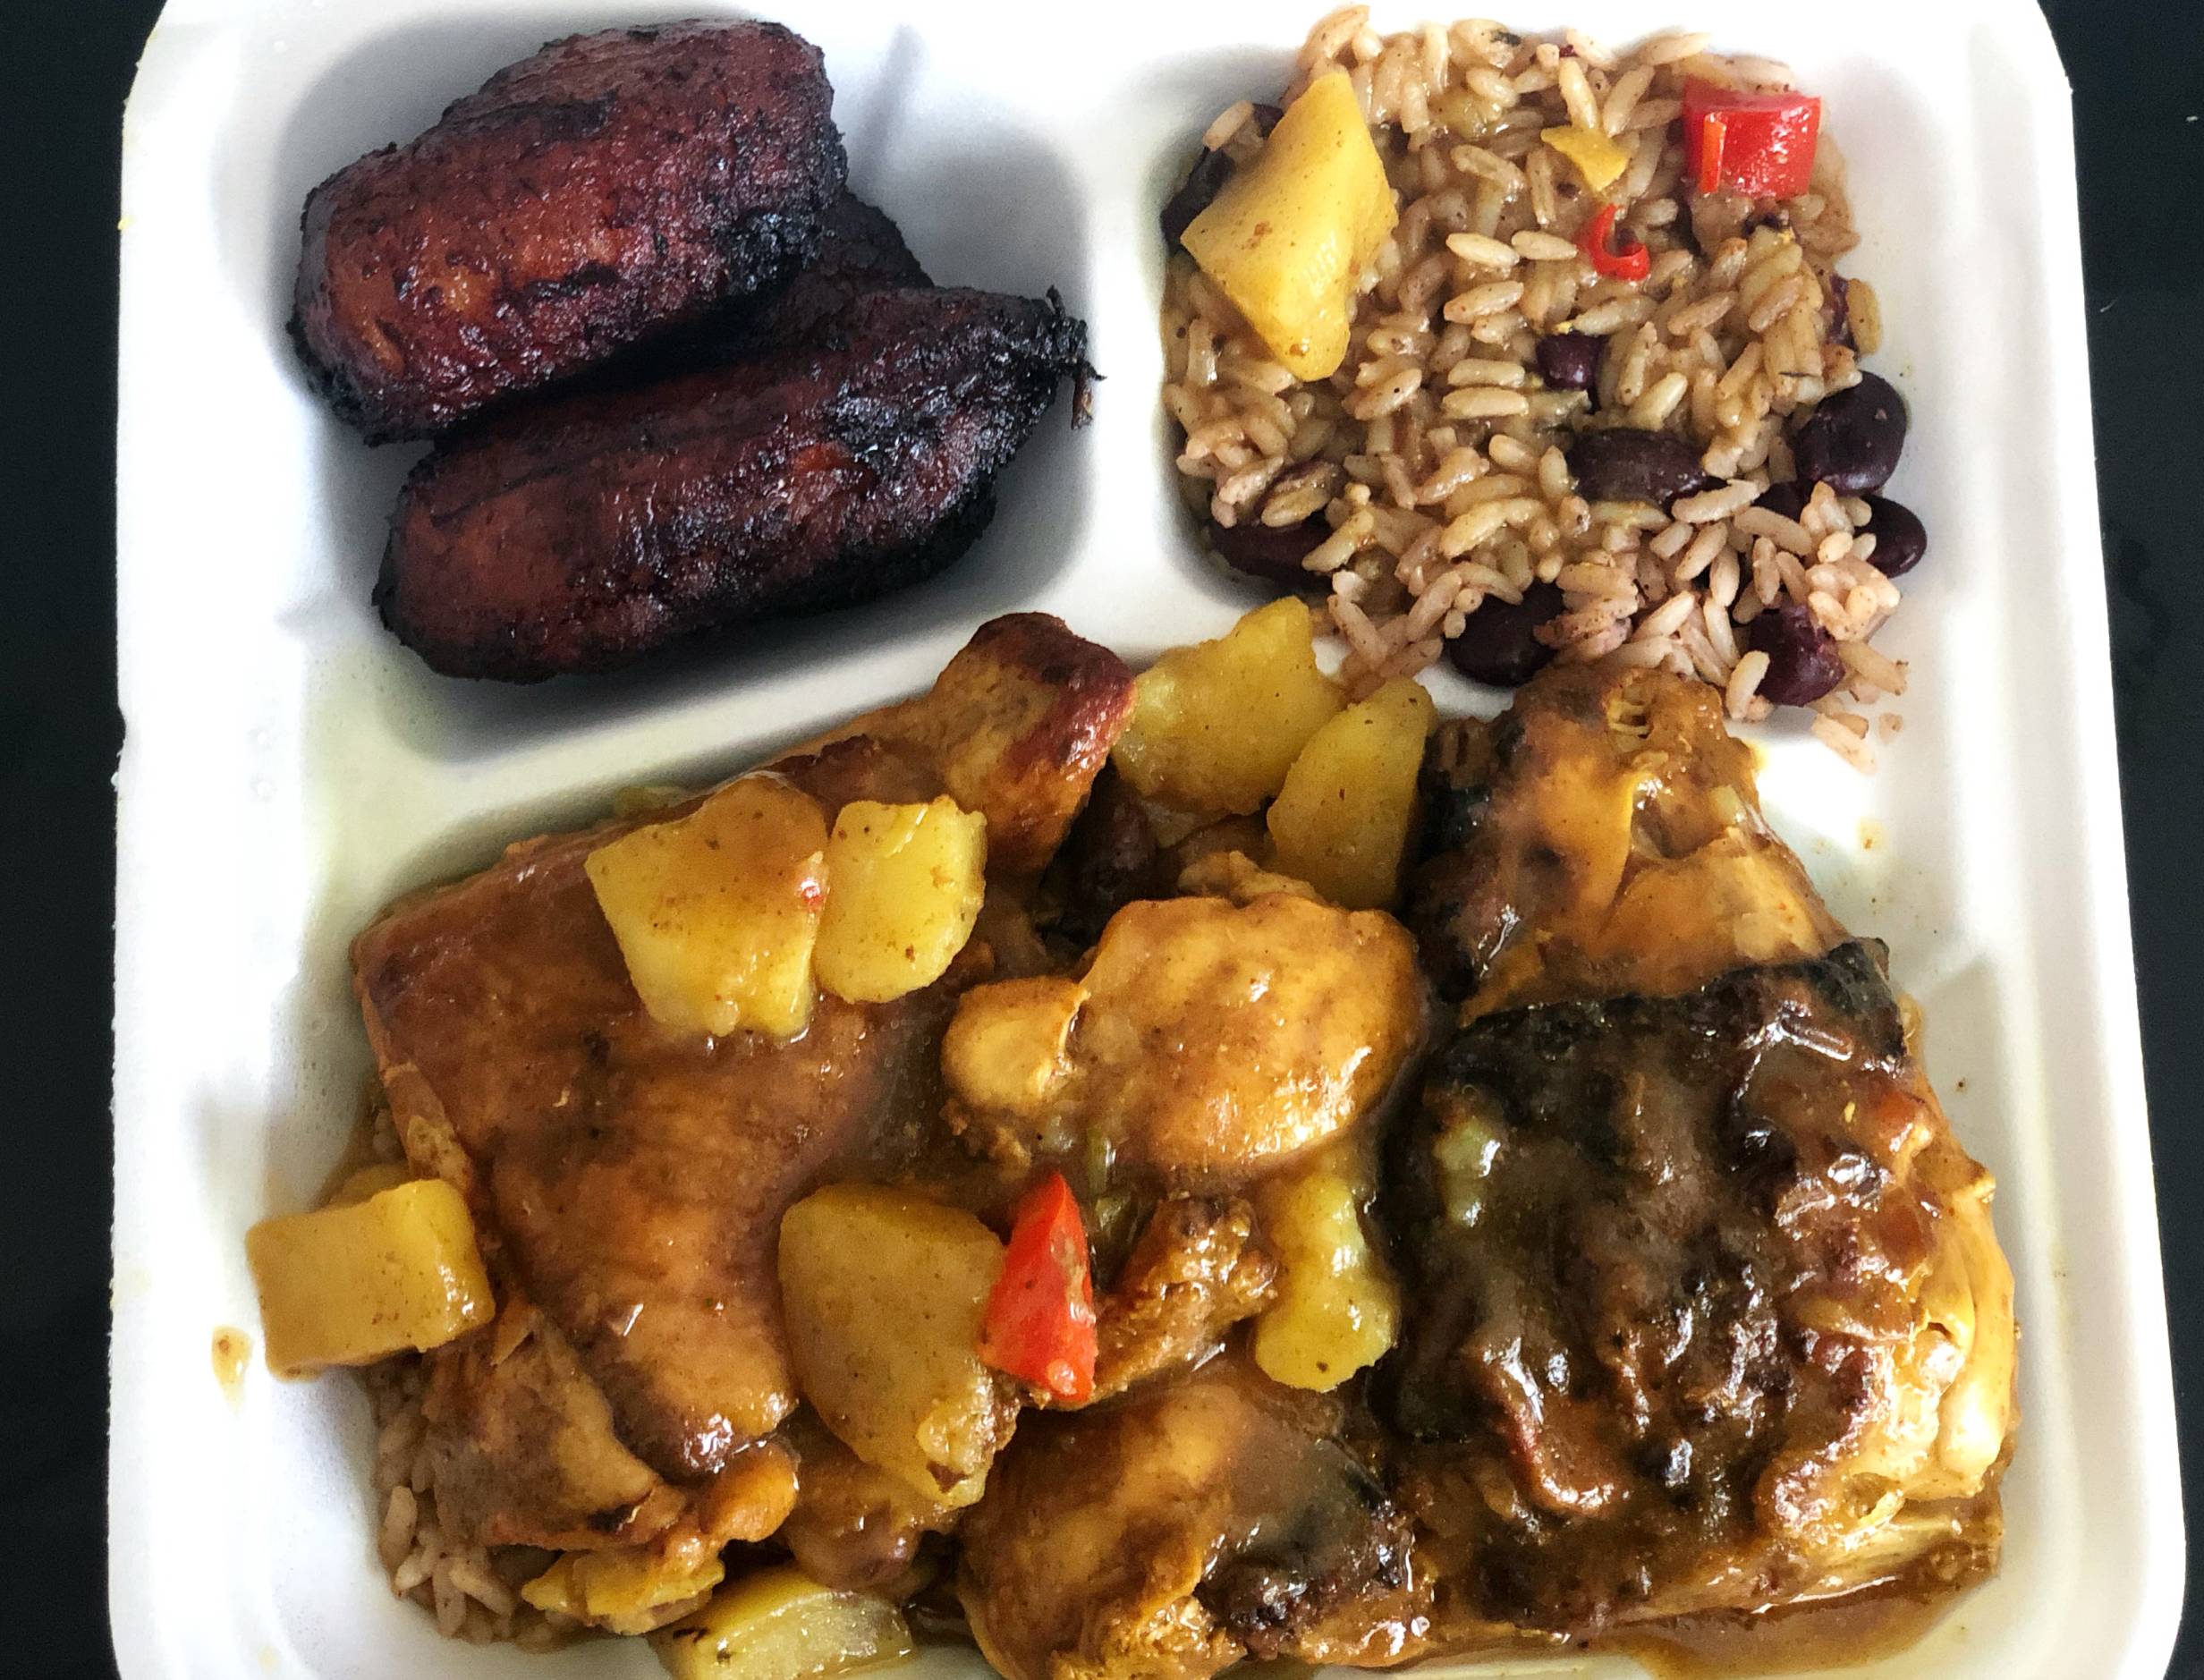 In a white styrofoam divider container, there is a chicken curry with large chunks of potato over brown chicken with a yellow sauce. In the top left divider, there are very dark brown fried plantains. In the top right divider, there are light brown rice with dark red kidney beans. Photo by Alyssa Buckley.